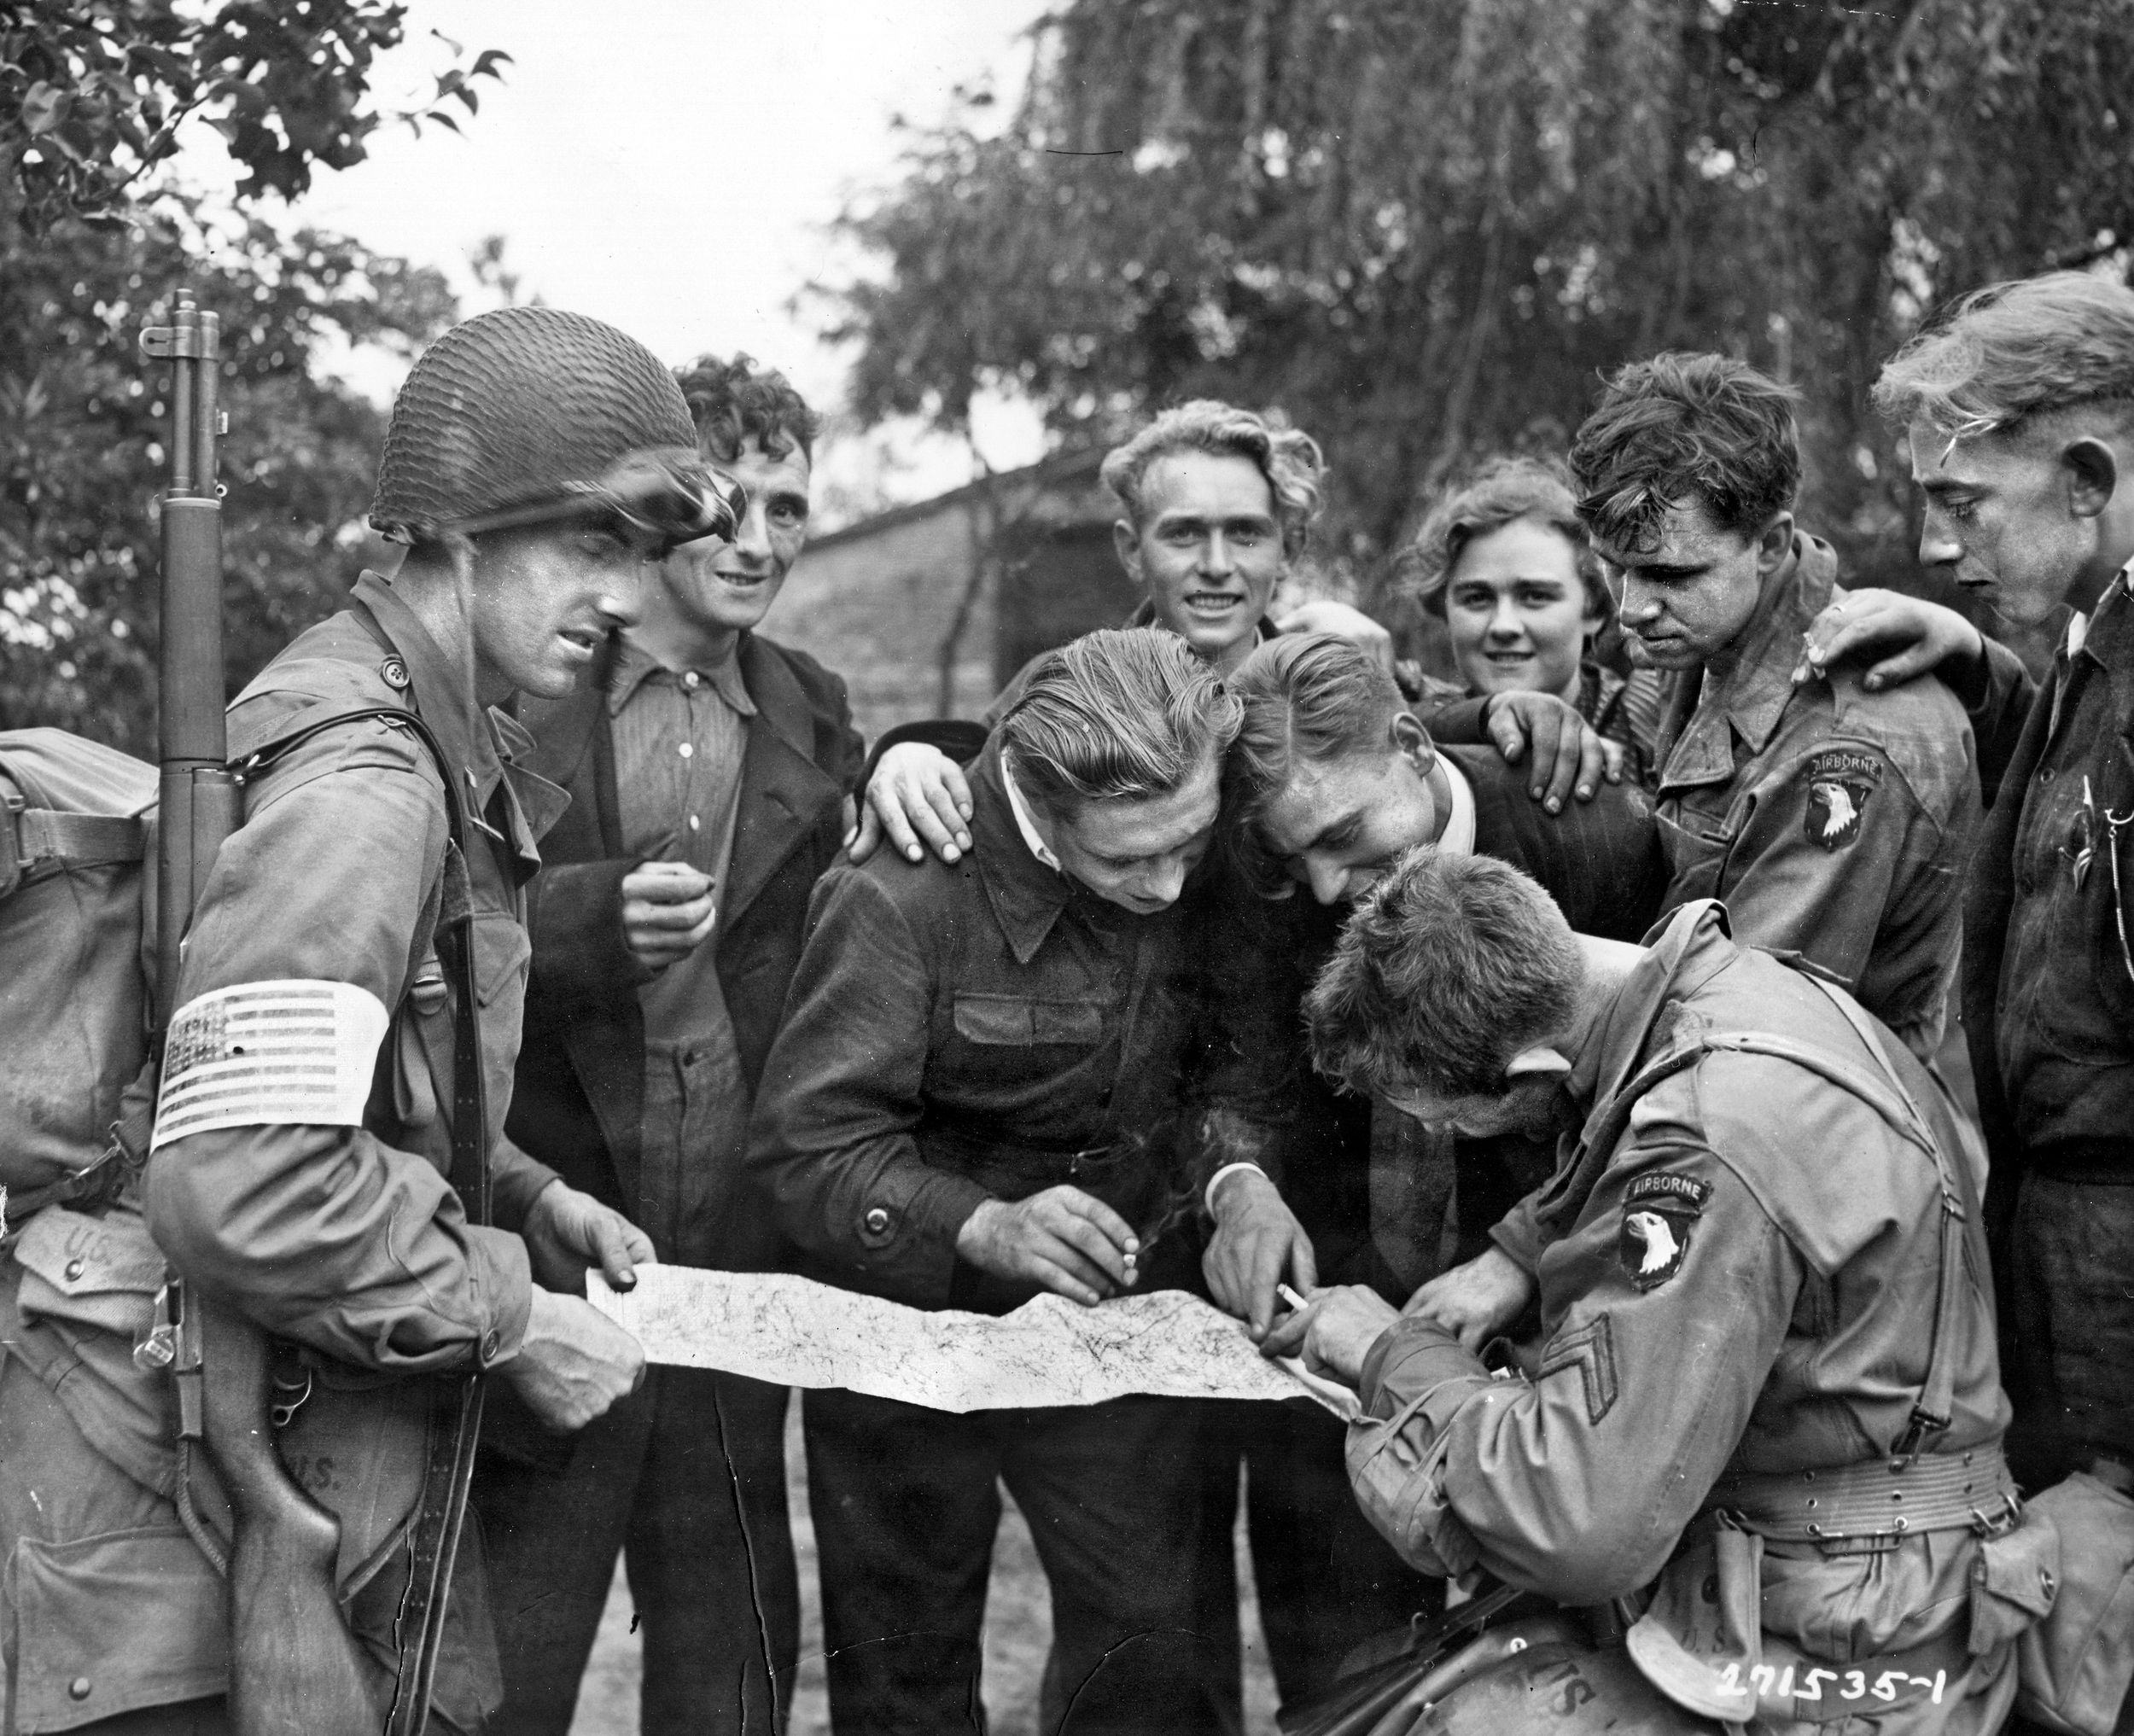 Dutch civilians, identified by some sources as members of the resistance, talk with troopers of the American 101st Airborne Division as they look over a map of the area.